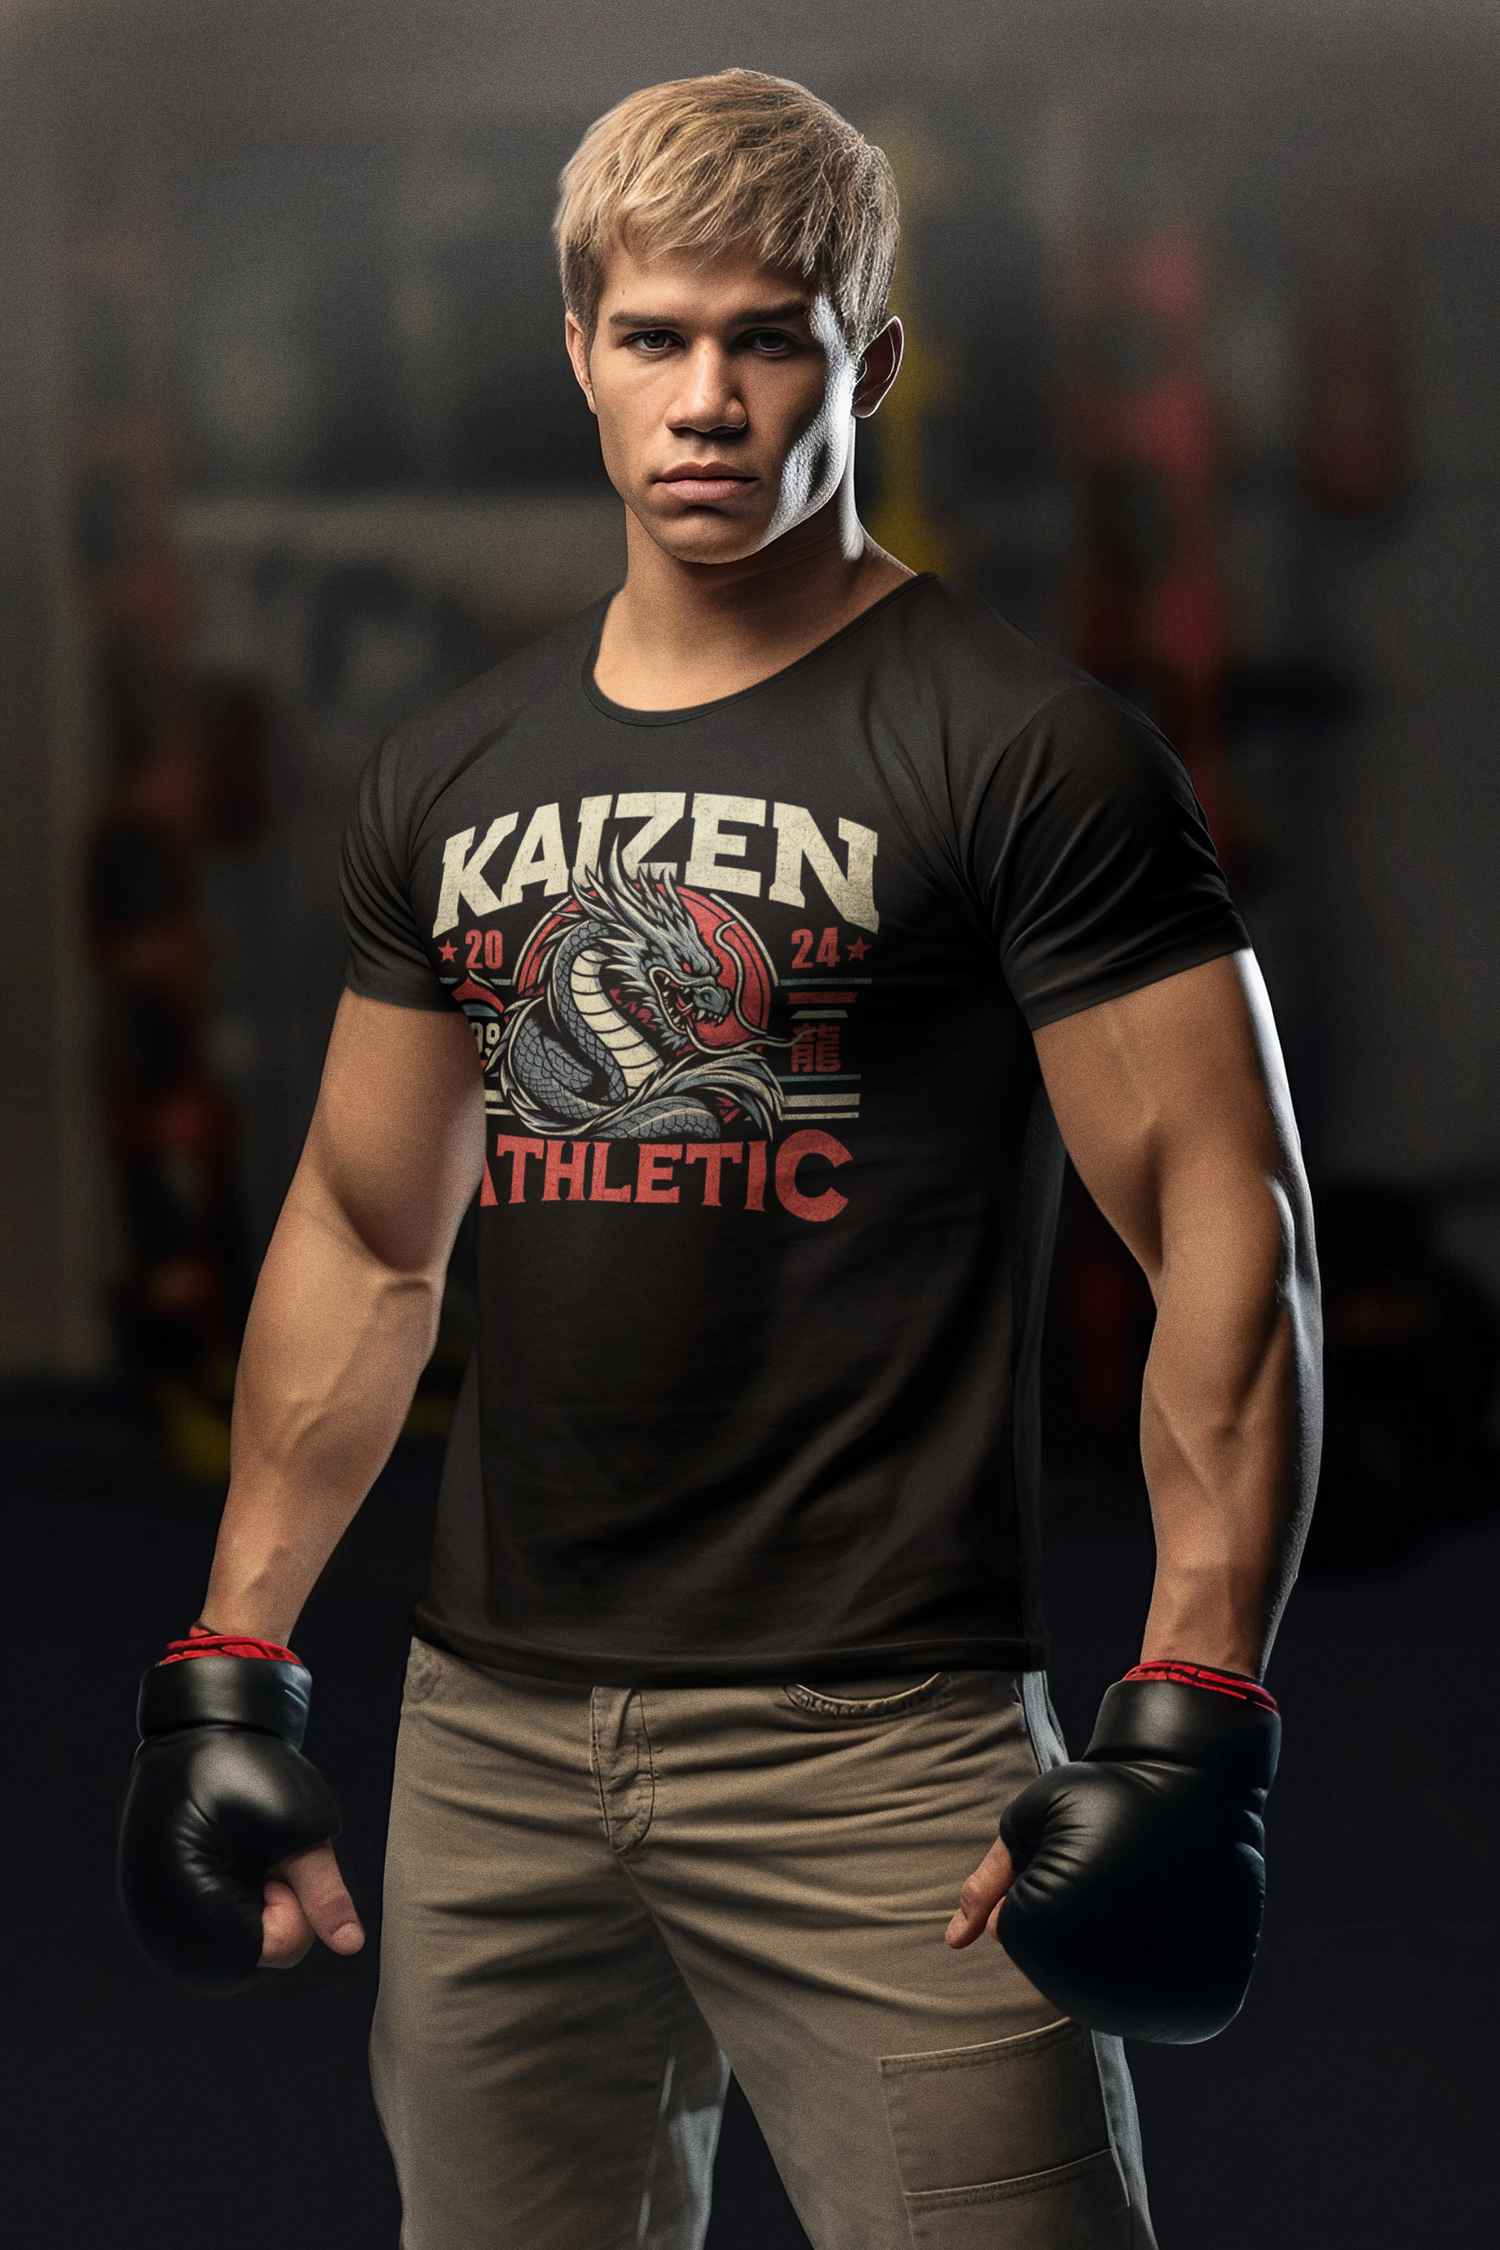 Year of the Dragon Classic Tee by Kaizen Athletic